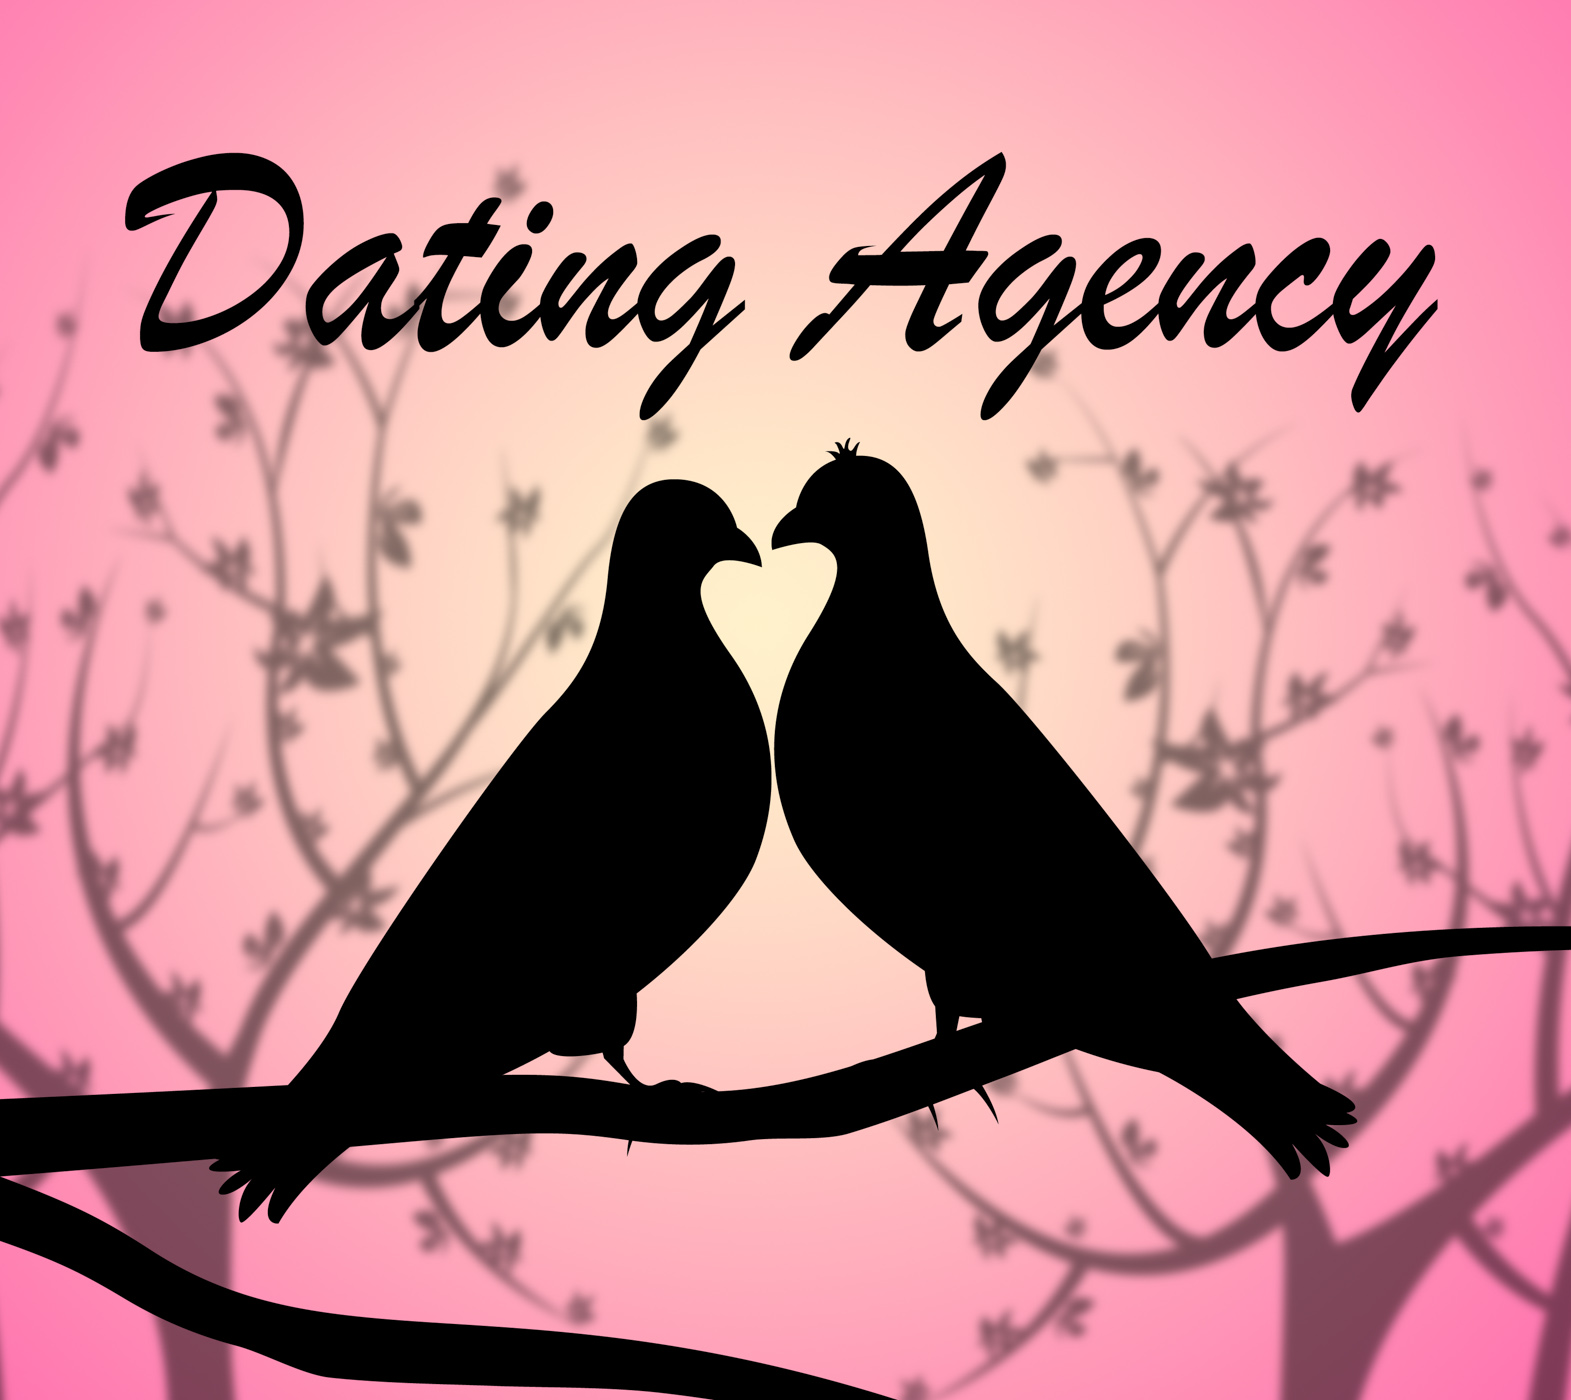 Dating agency means business net and sweetheart photo